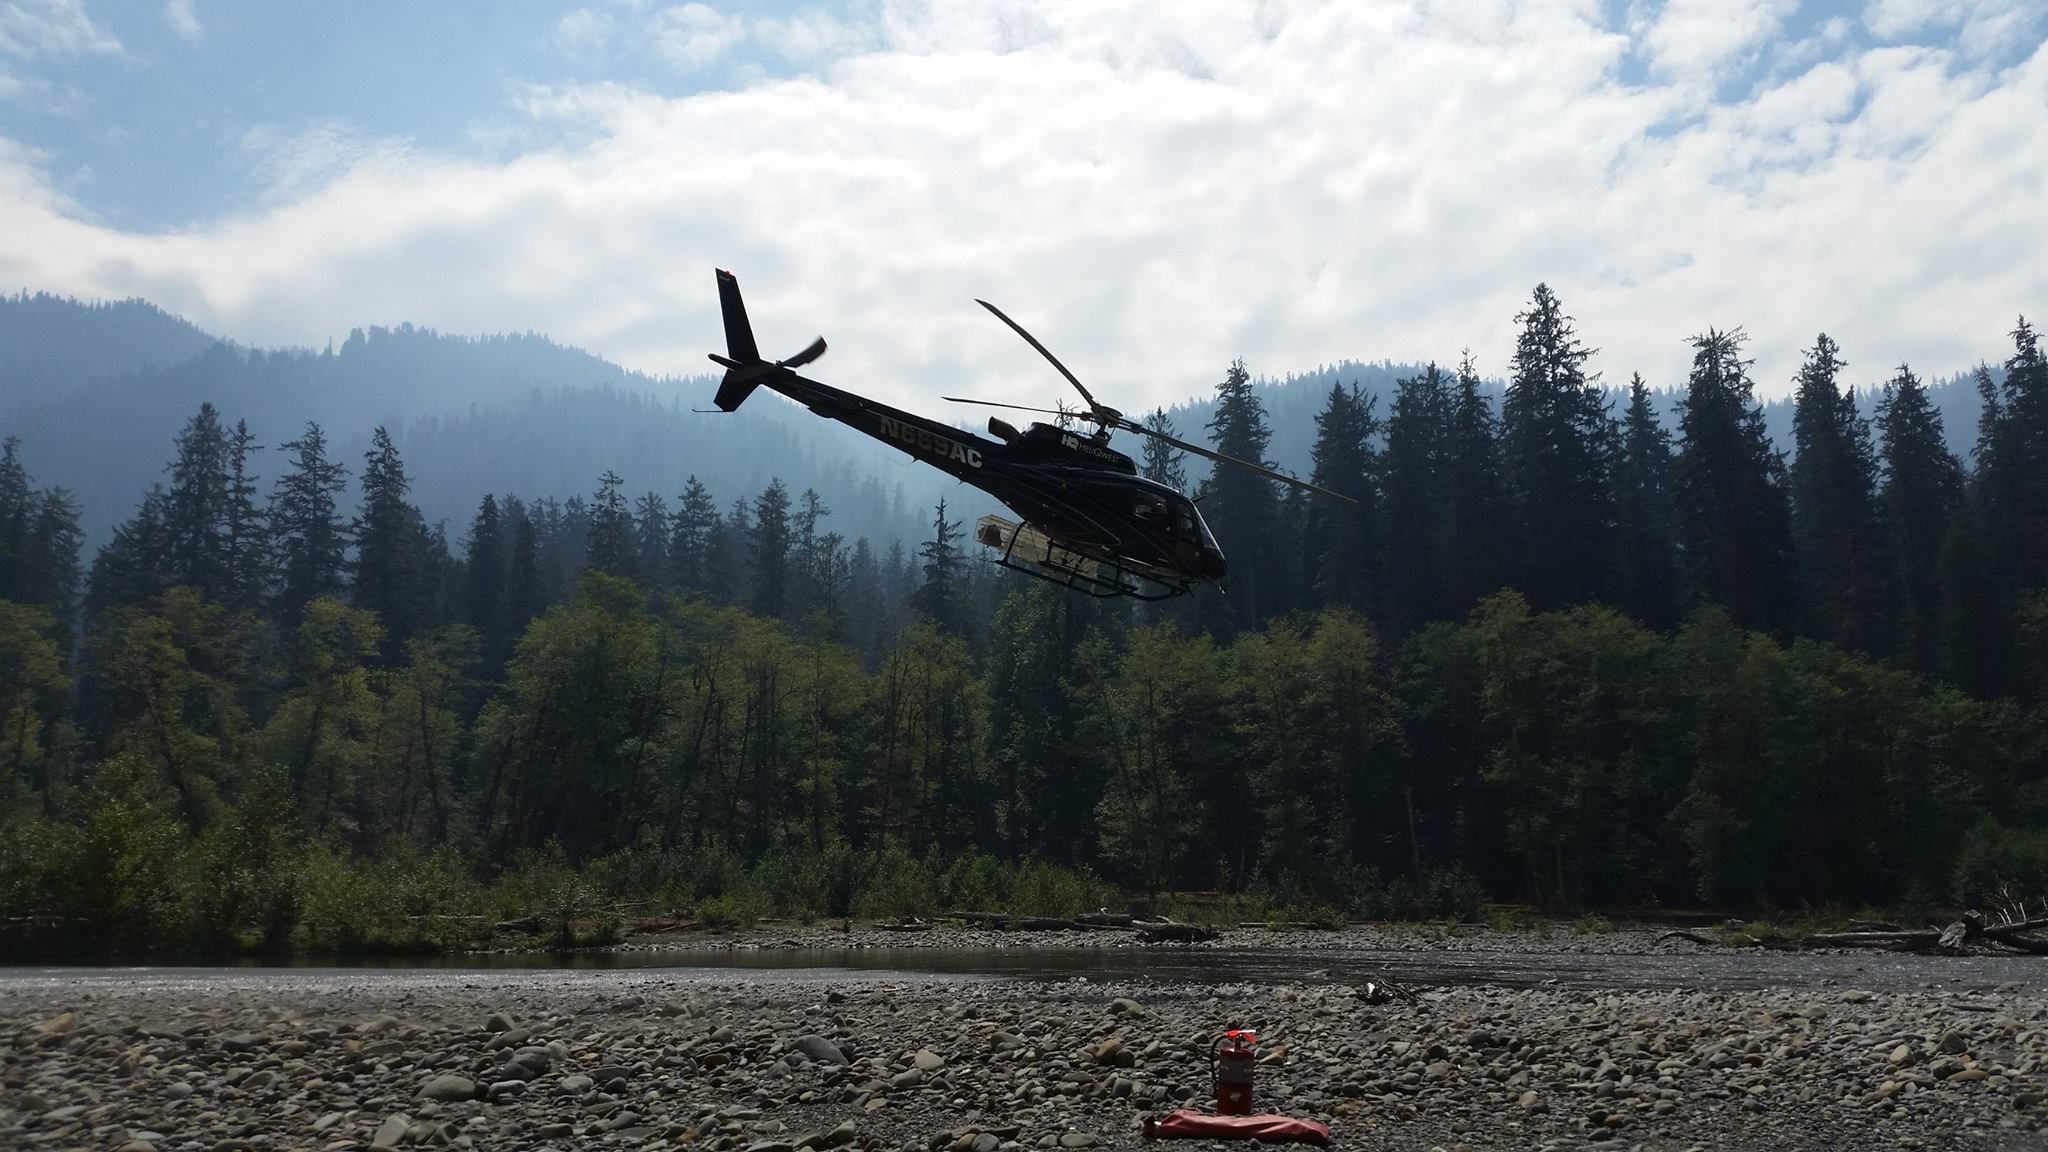 A Type 3 firefighting helicopter departs for a mission near the Paradise Fire perimeter. Olympic National Park